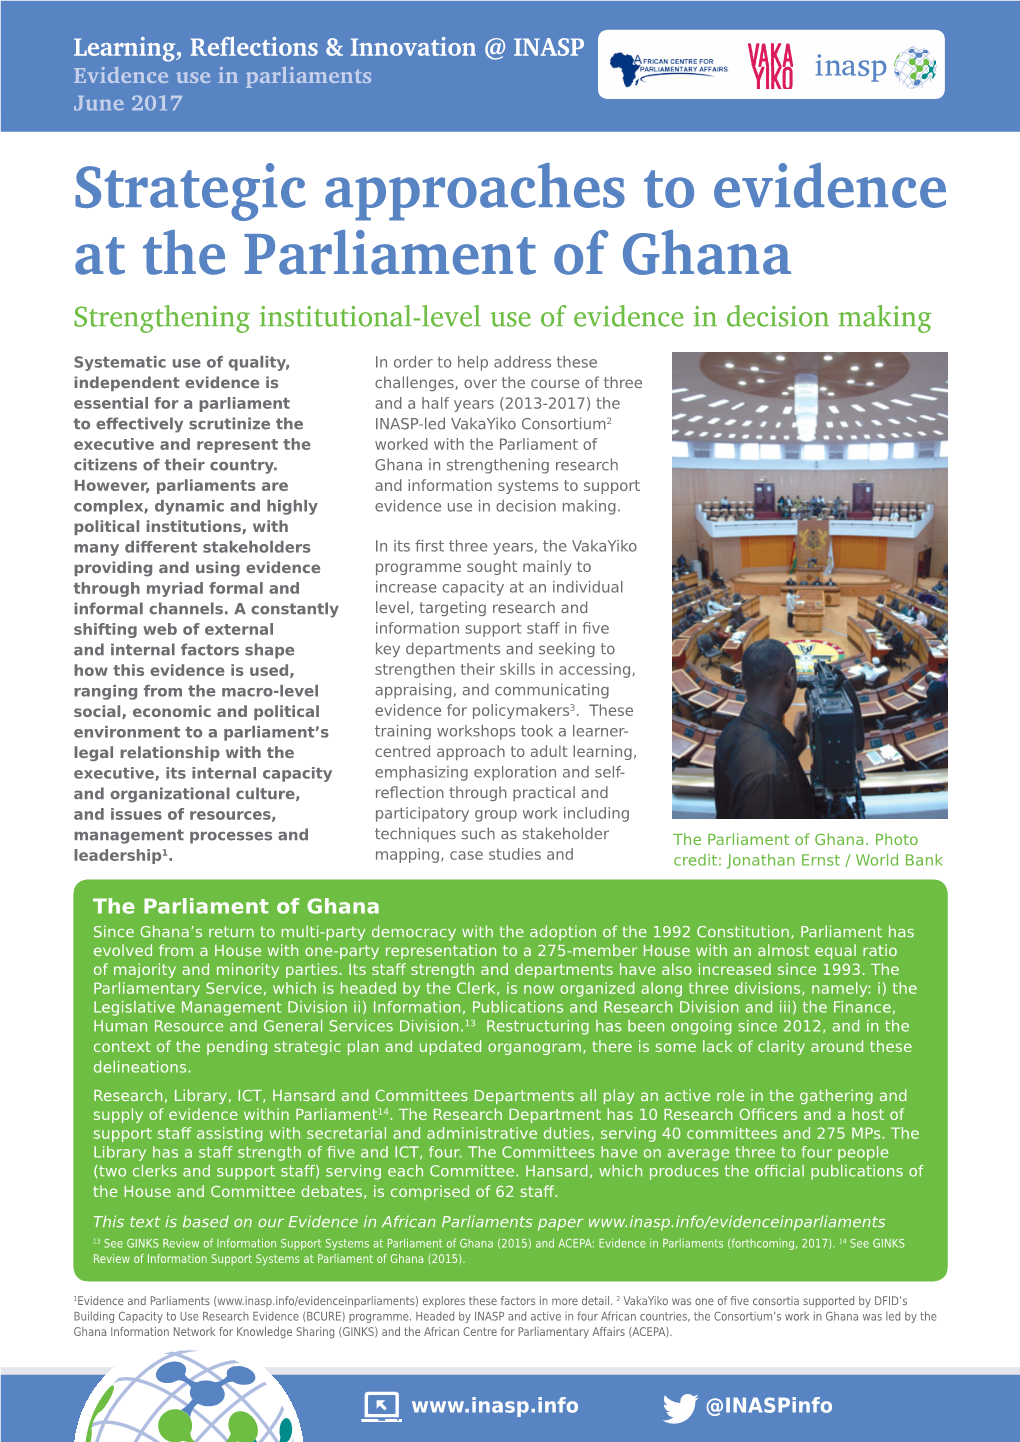 Strategic Approaches to Evidence at the Parliament of Ghana Strengthening Institutional-Level Use of Evidence in Decision Making